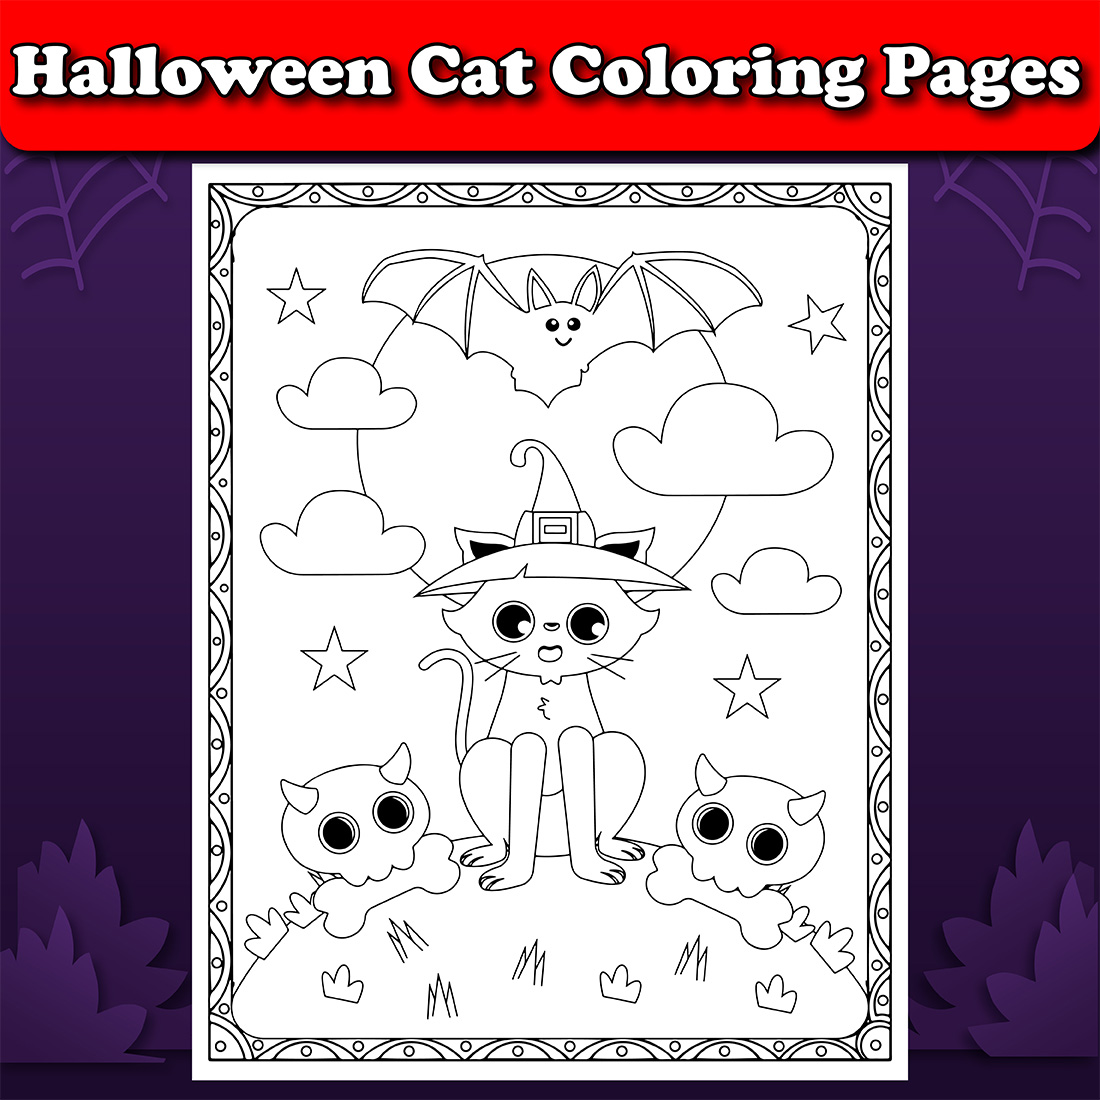 Halloween Cat Coloring Page for Kids cover image.